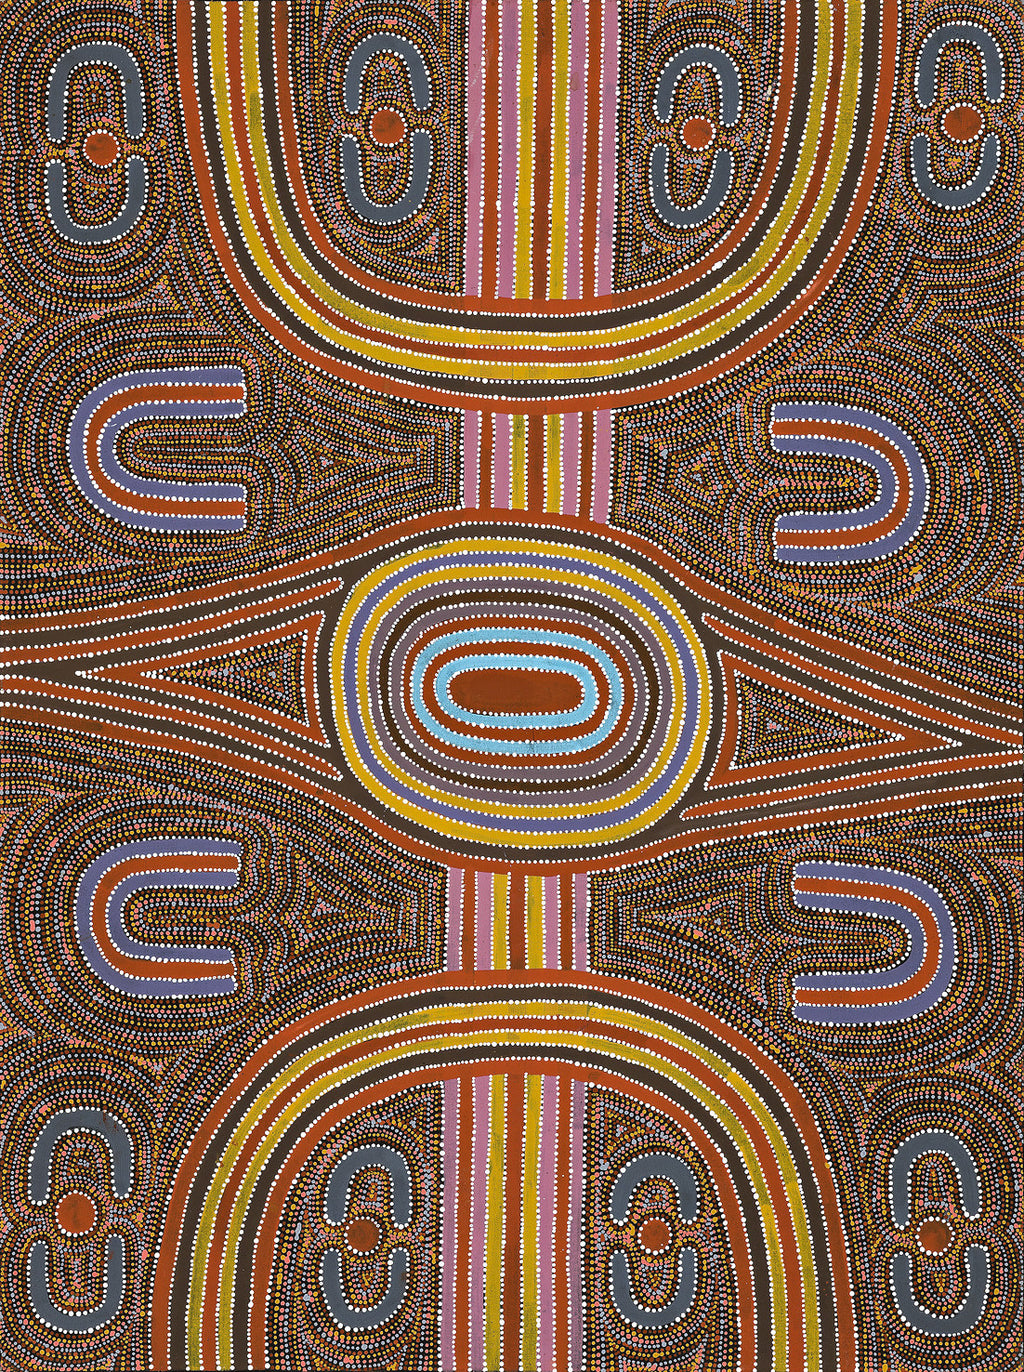 Louie Pwerle, Painting 94C035, 1994, 90x121cm - Delmore Gallery